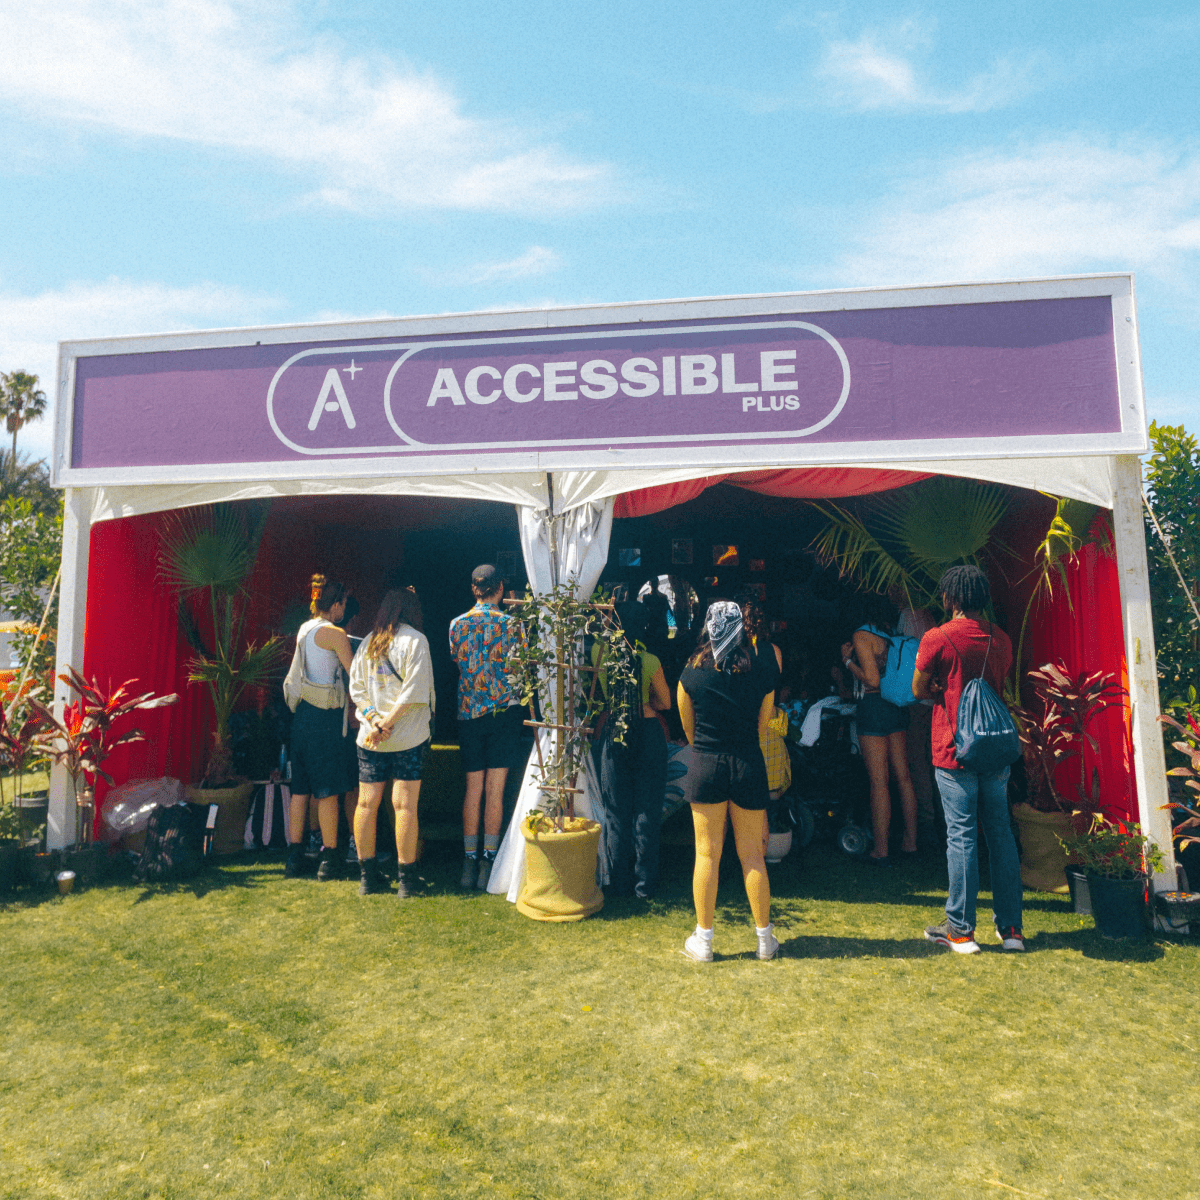 Photo of fans standing in Accessible+ tent